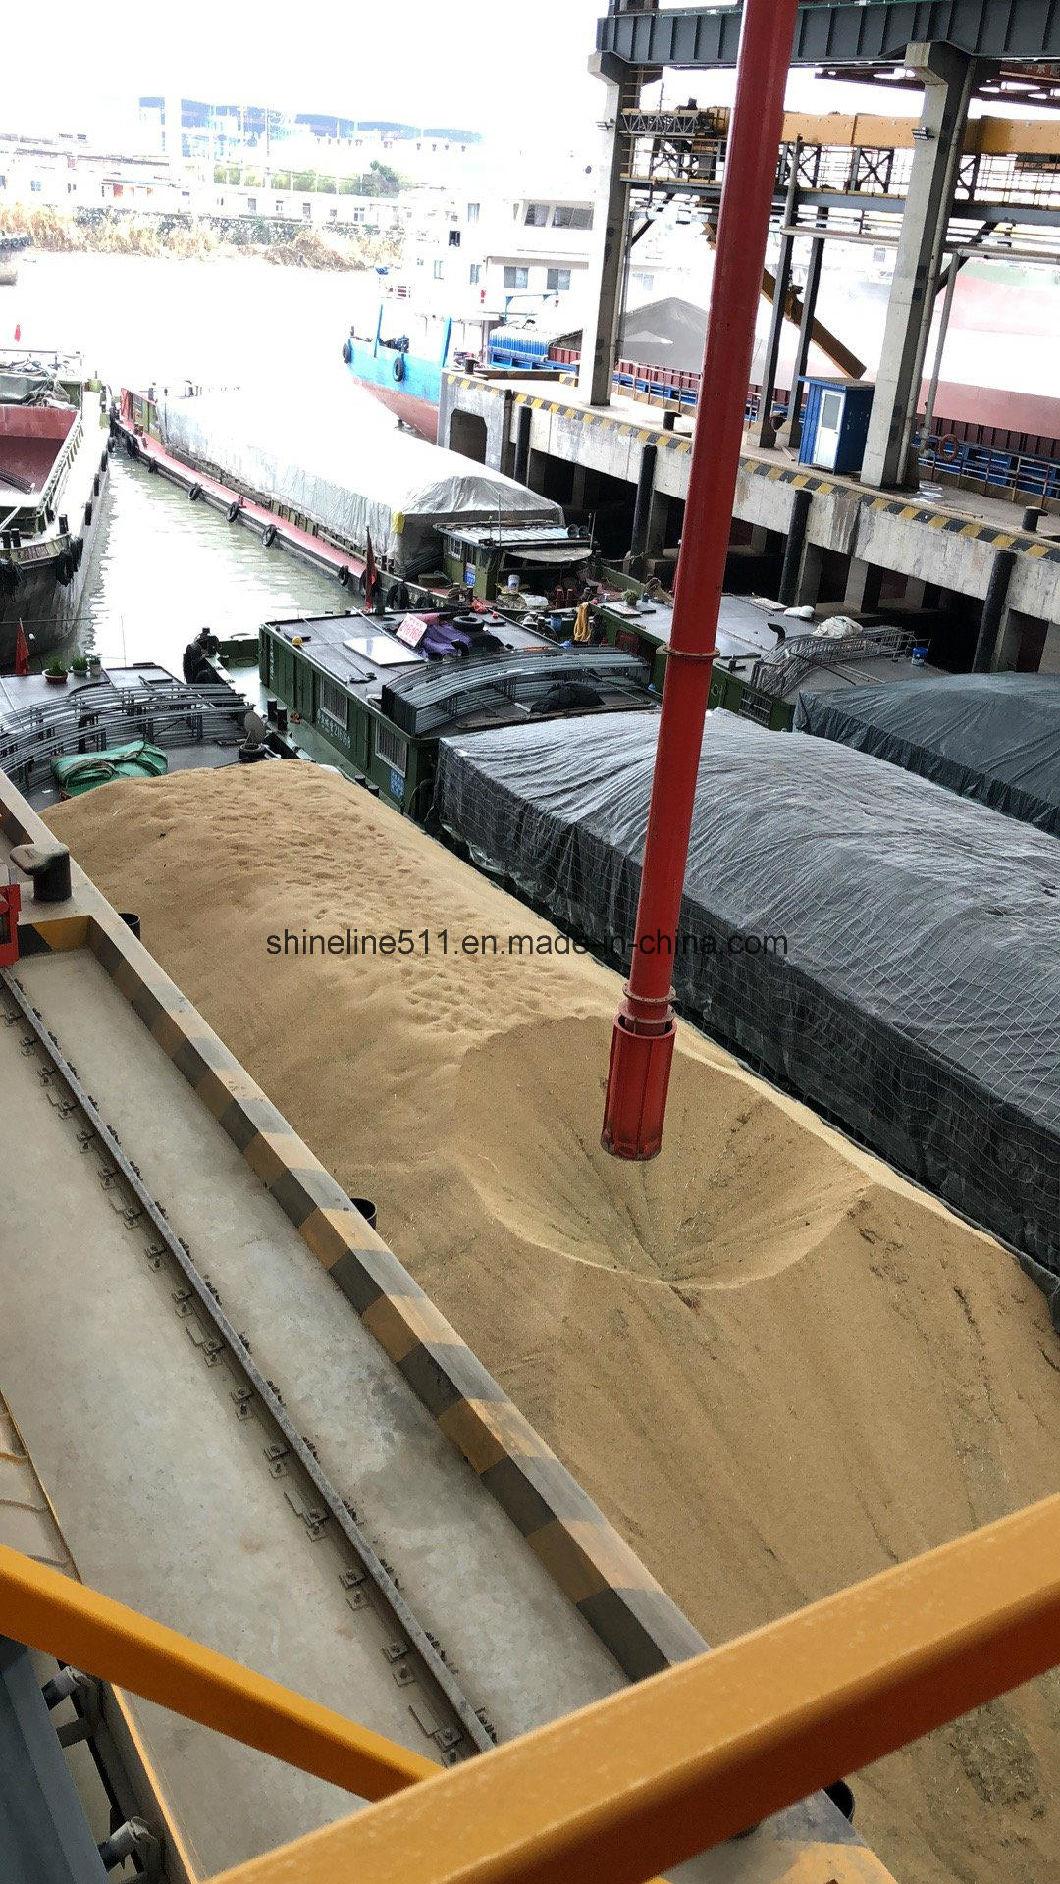 All The Granary Materials Available Xiangliang Brand Conveyor Port Grain Unloader